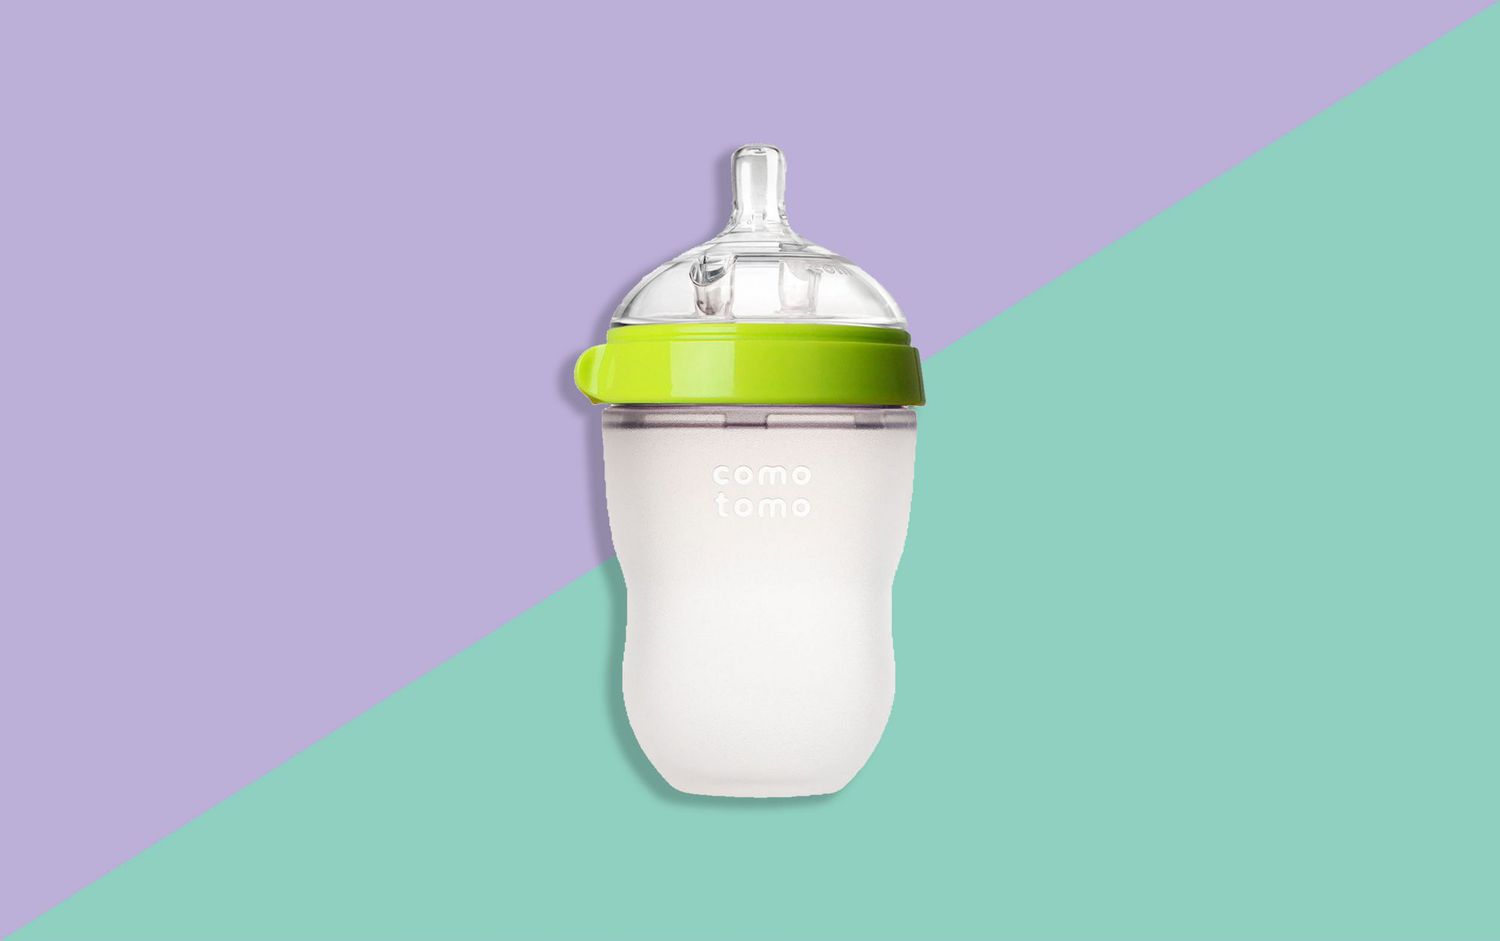 pictures of baby bottles